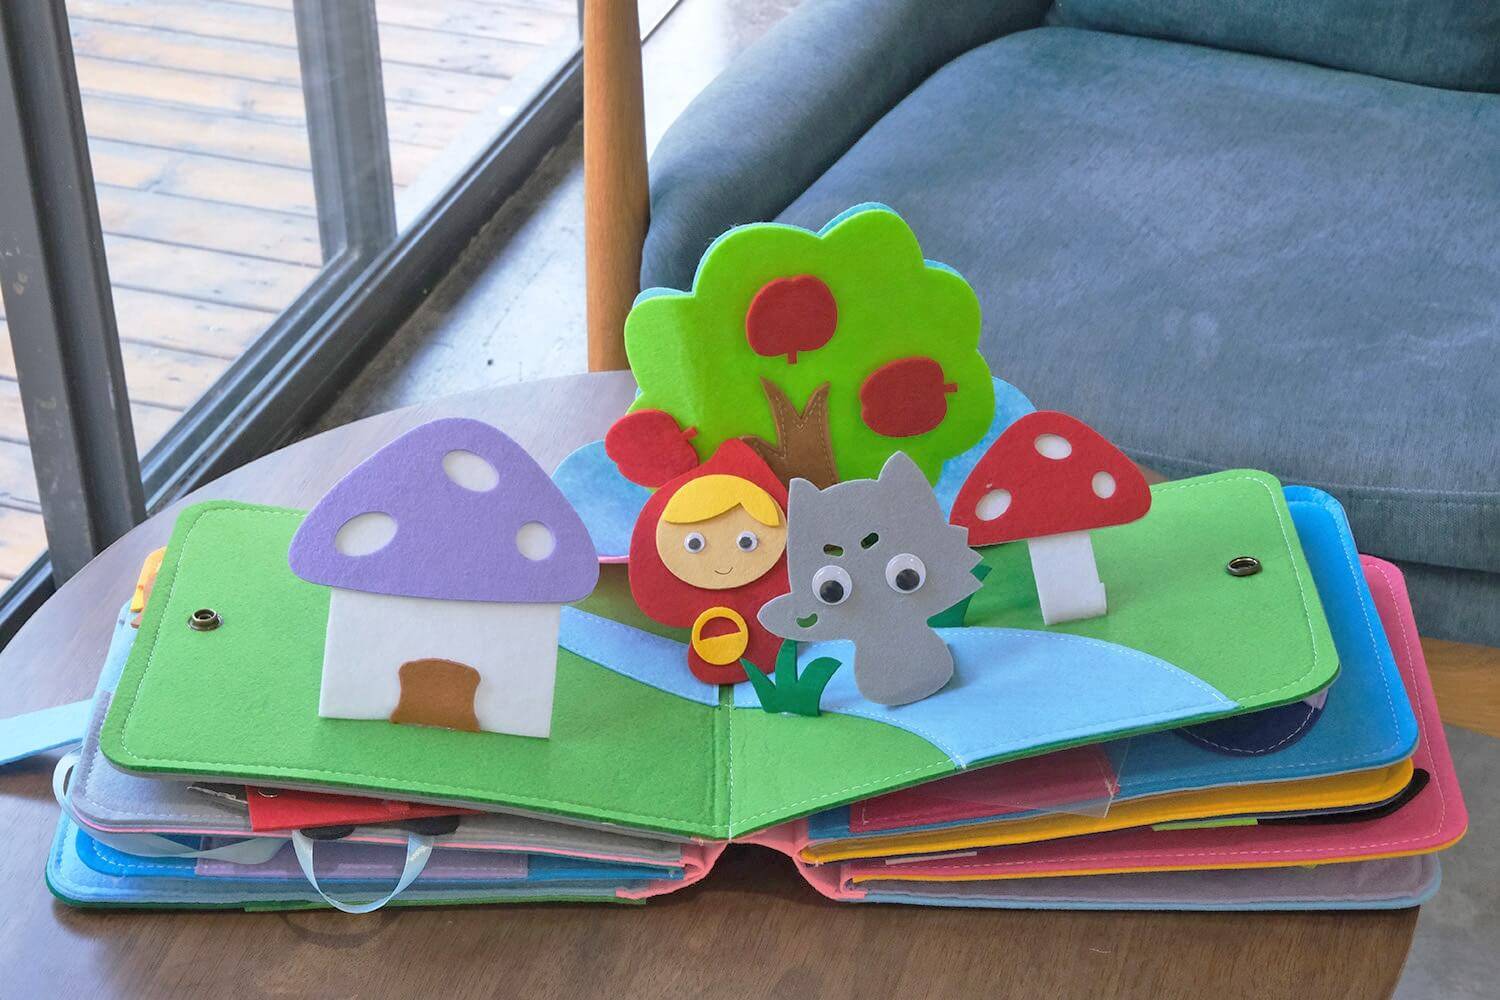 An opened page of a quiet book placed on a table showing a house, a tree, a wolf, and a Little Red Riding Hood.